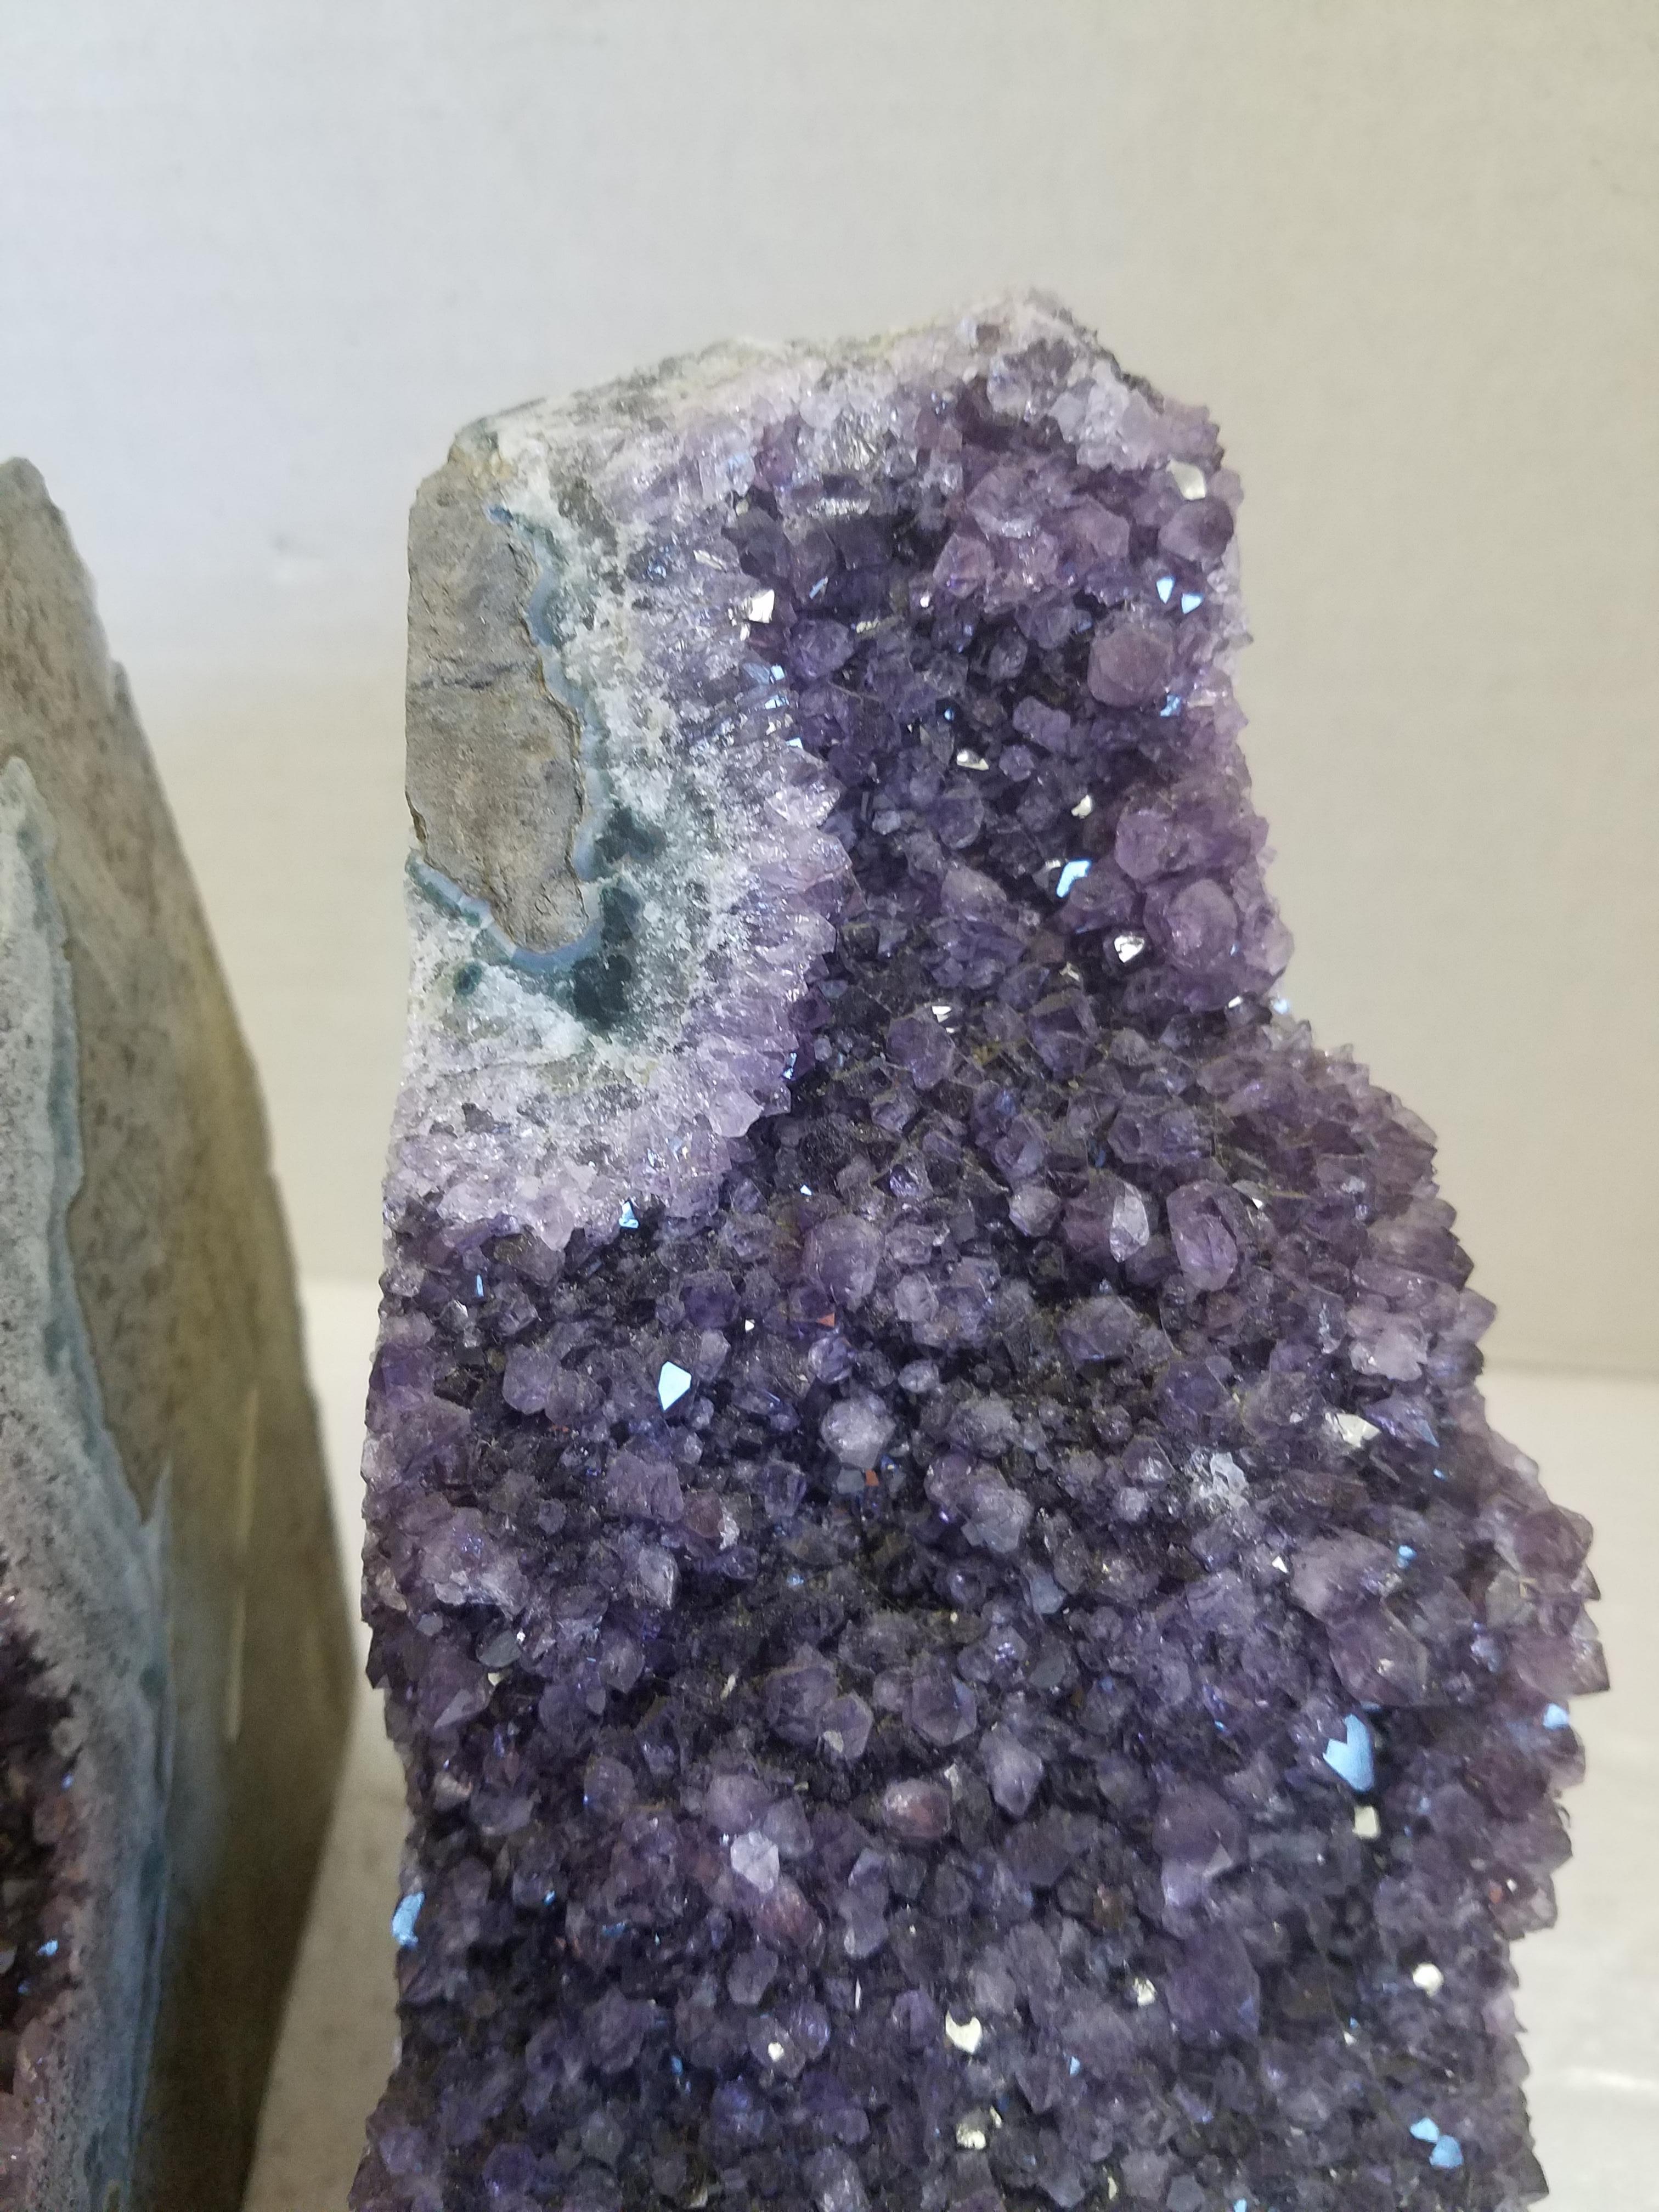 Pair of natural amethyst geodes made into bookends. Beautiful and very faceted with small crystals. See details in photos. Measurement of one side is 4 W x 7 H x 5 D.